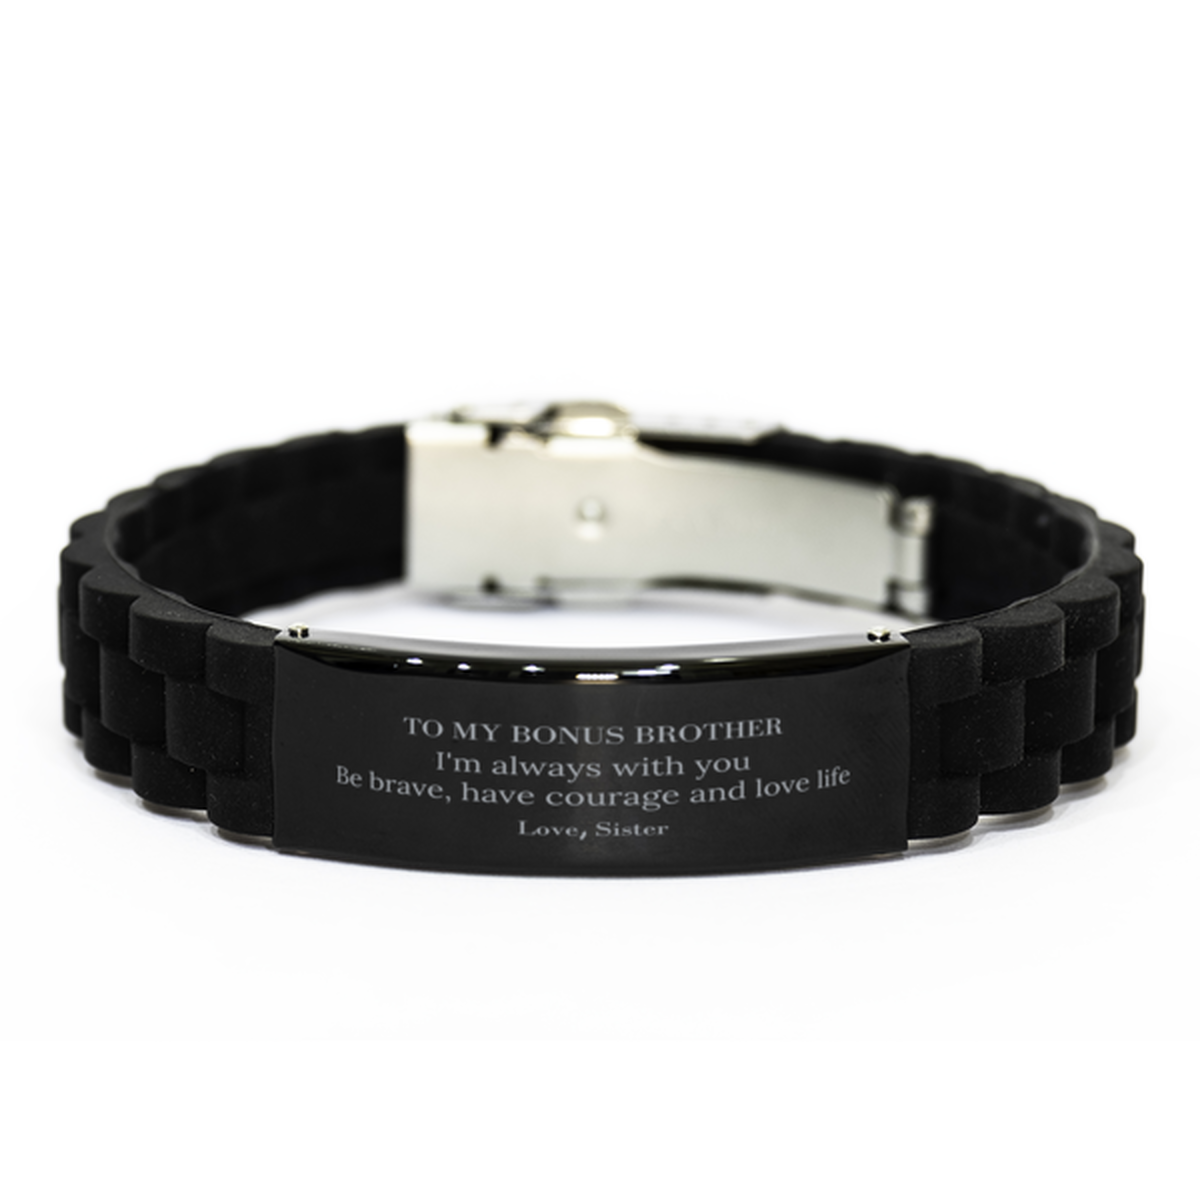 To My Bonus Brother Gifts from Sister, Unique Black Glidelock Clasp Bracelet Inspirational Christmas Birthday Graduation Gifts for Bonus Brother I'm always with you. Be brave, have courage and love life. Love, Sister